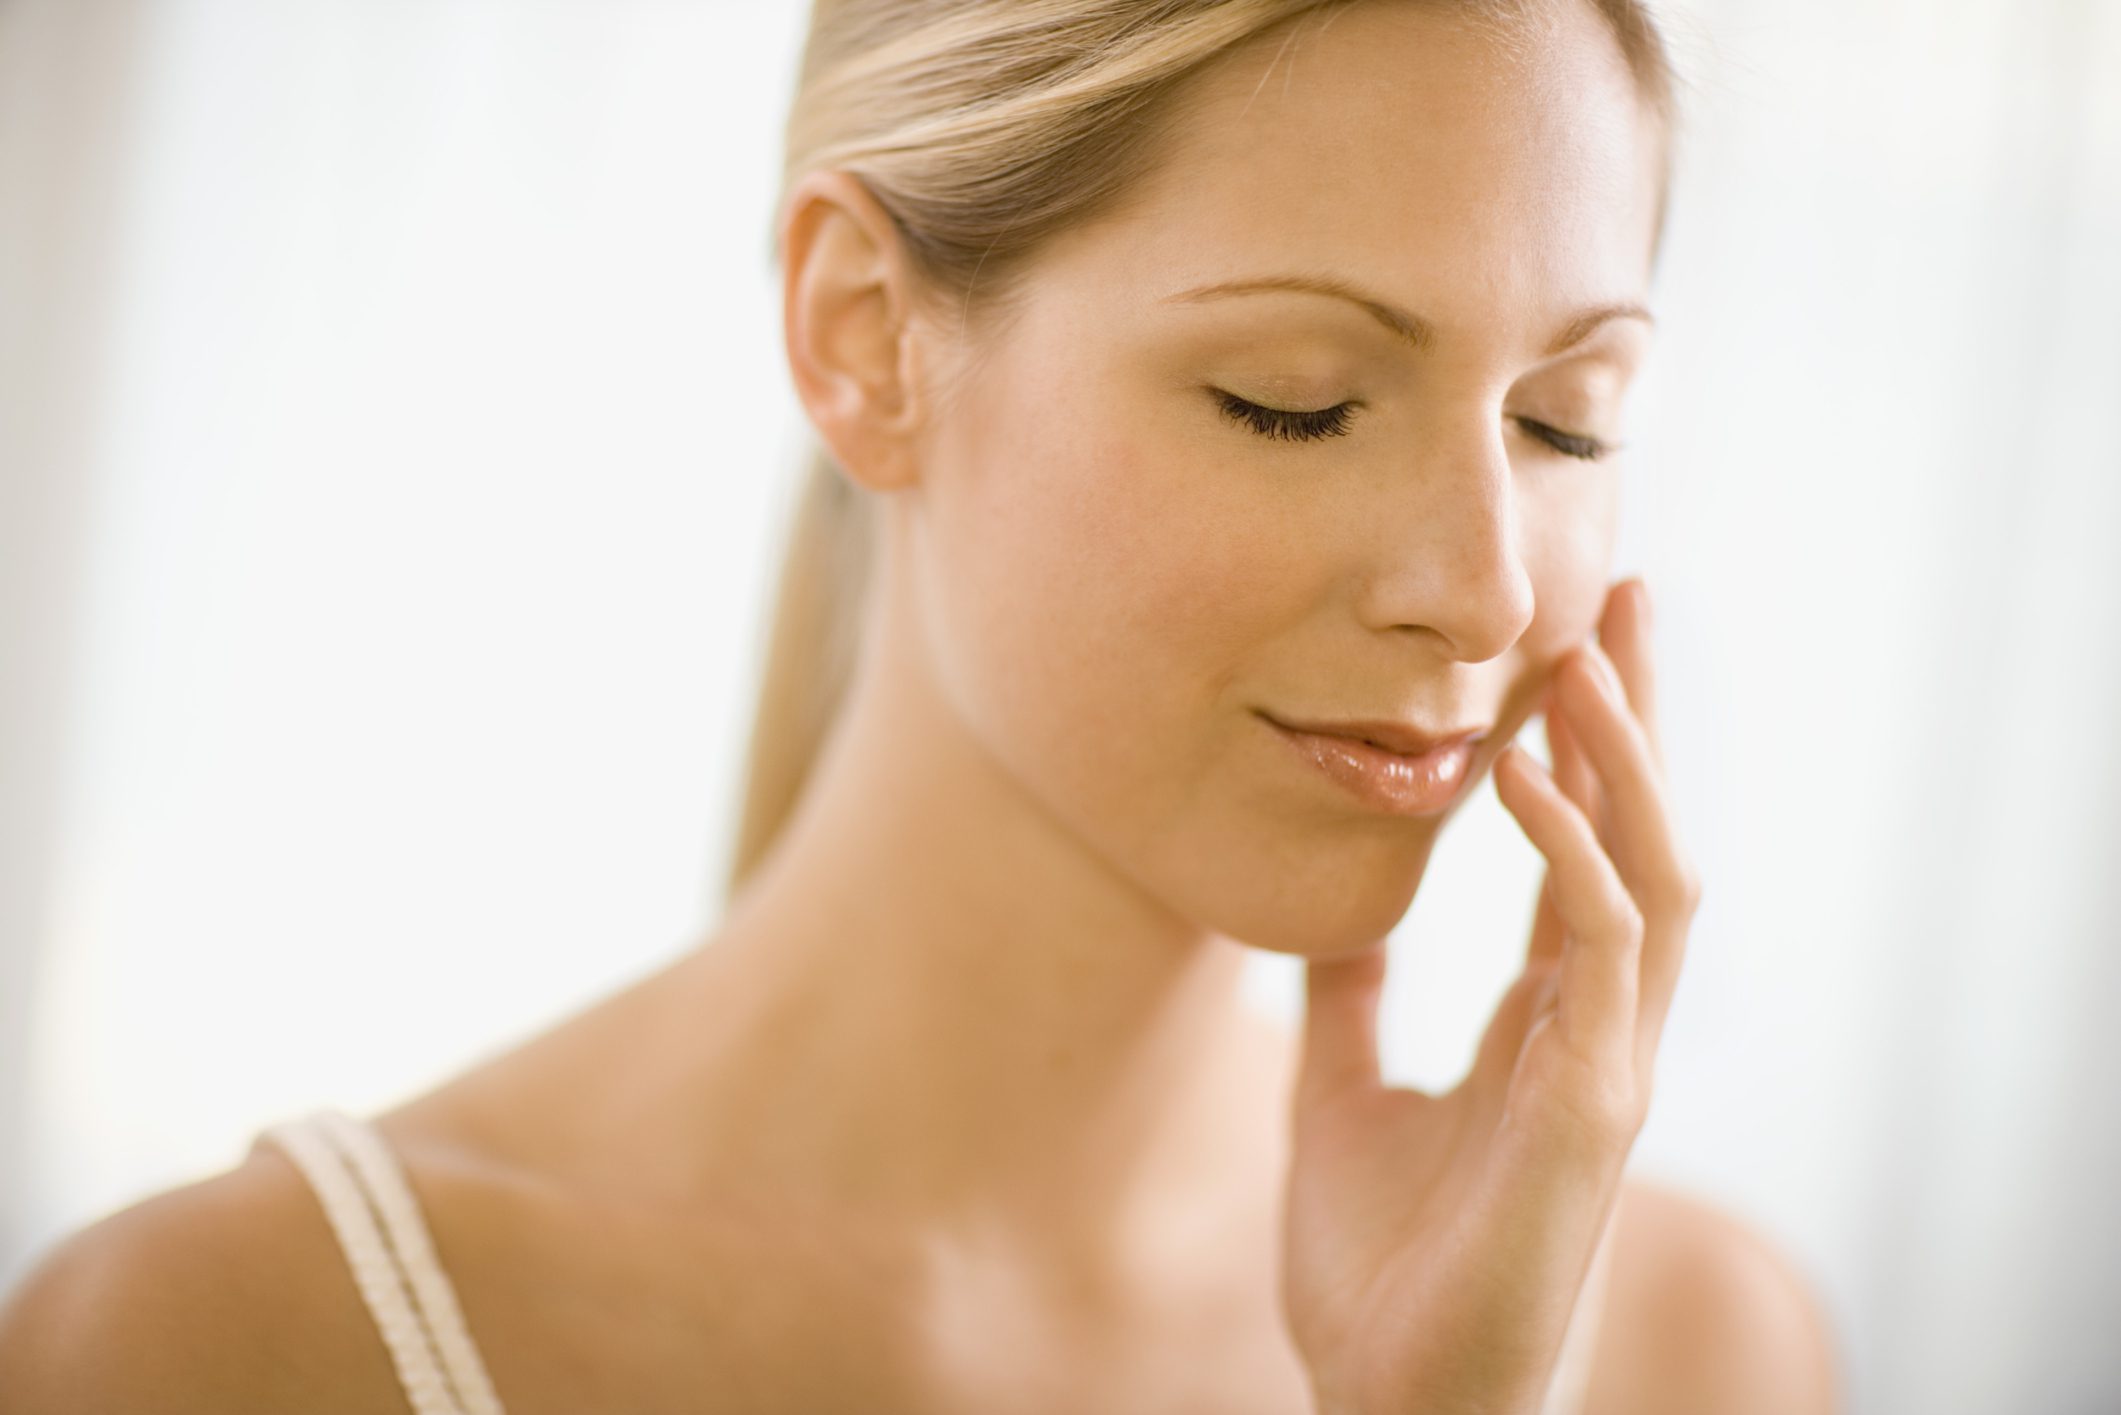 What Acne Scars? 3 Cosmetic Treatments to Make Them Fade